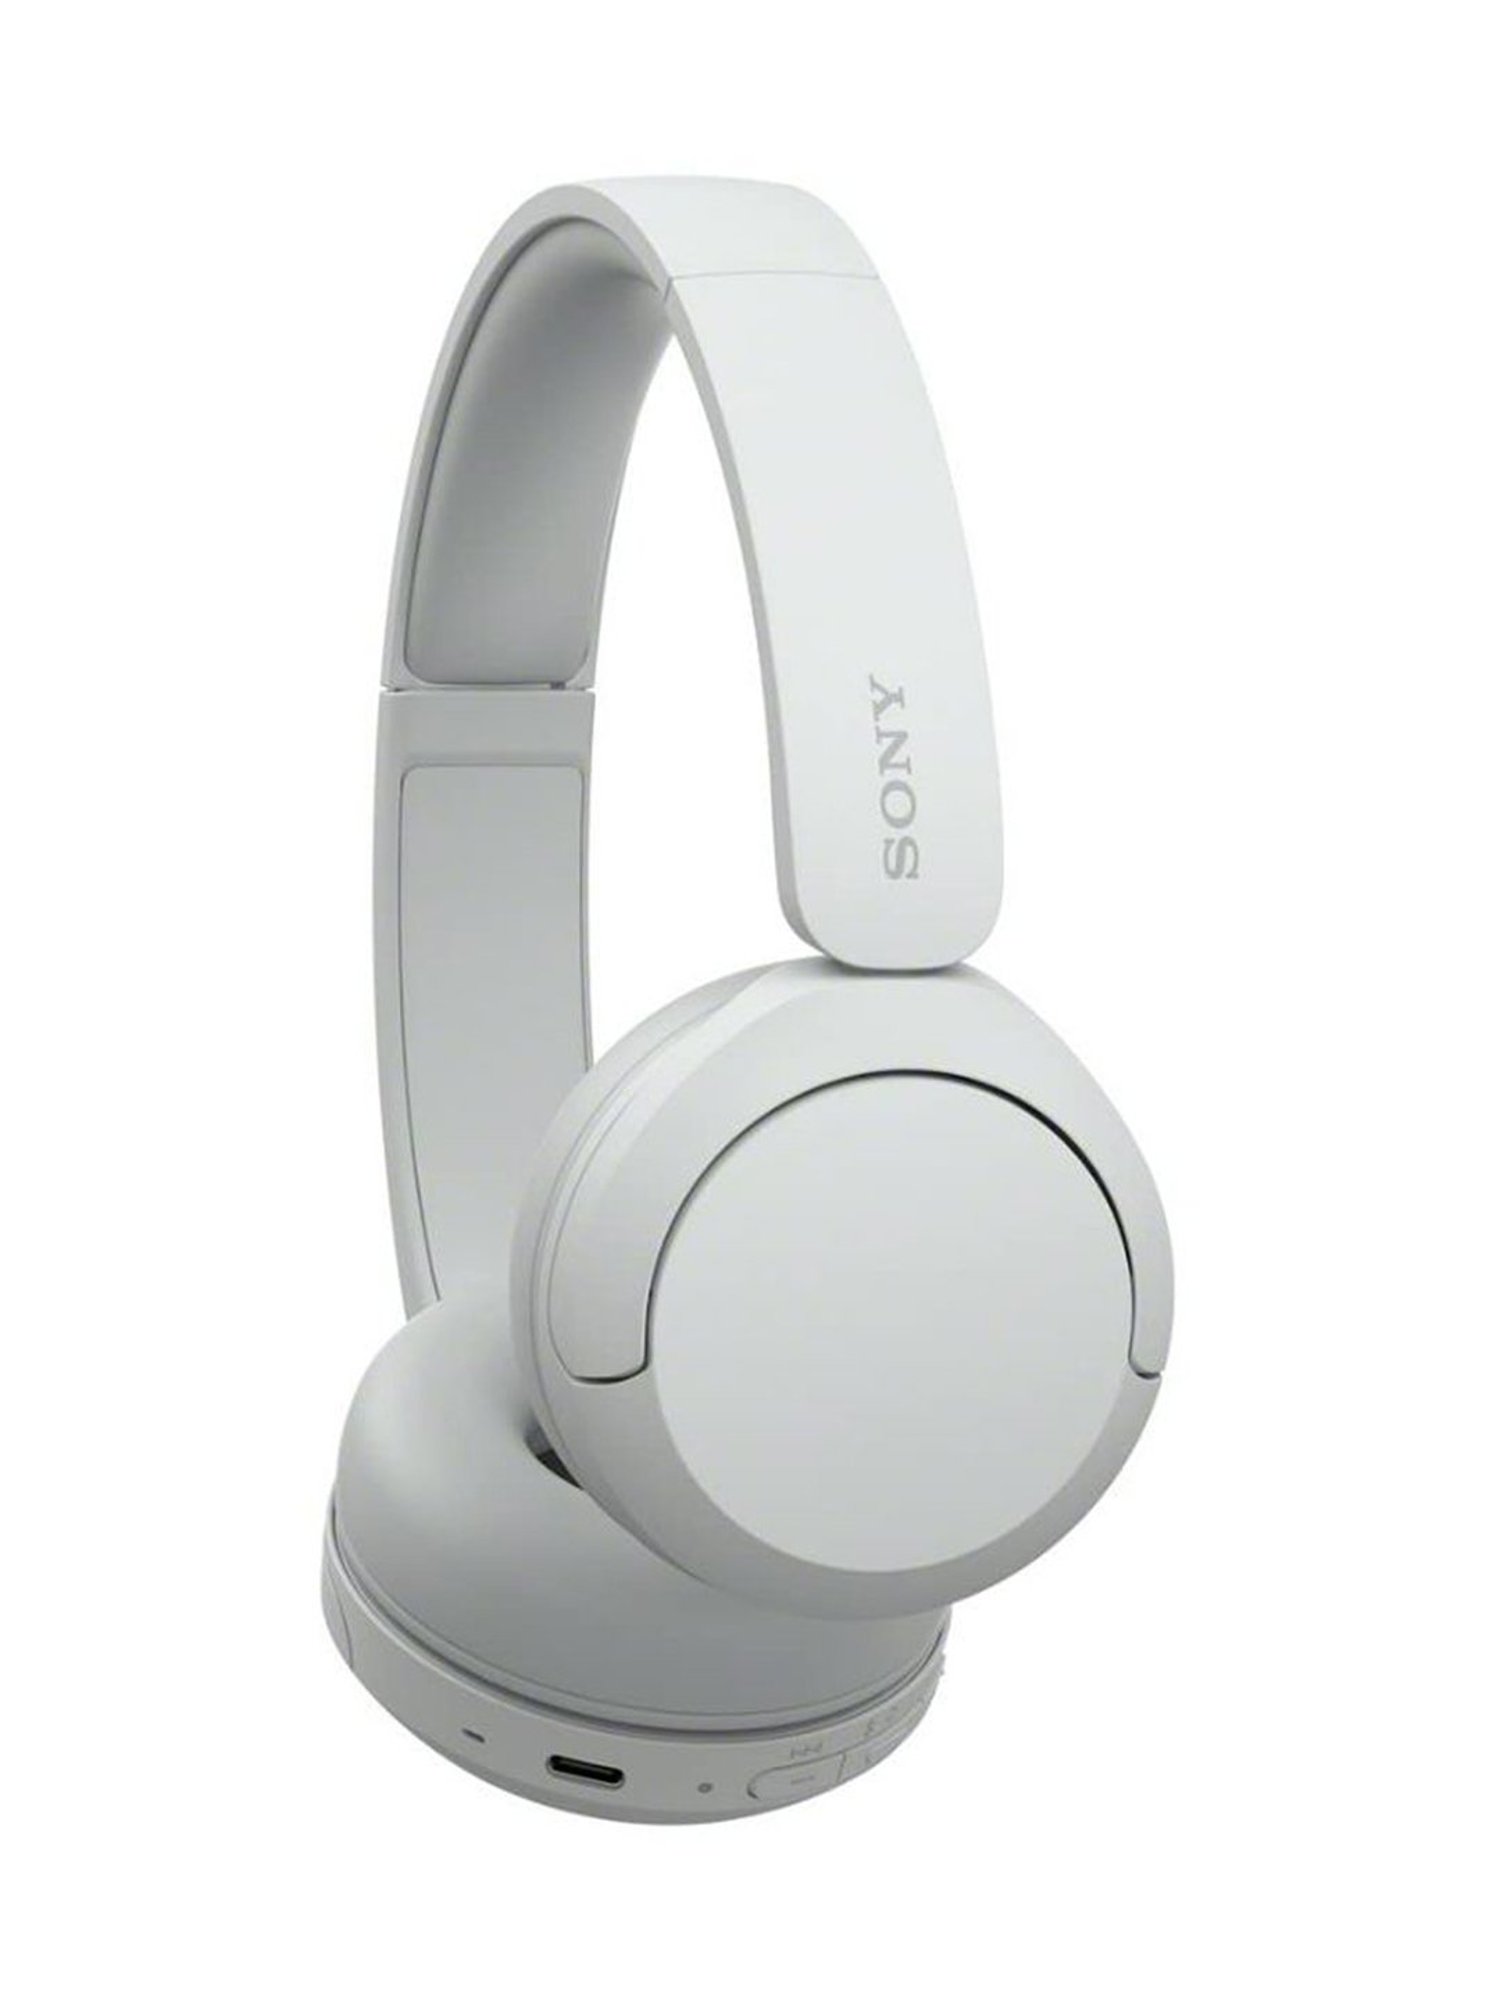 Buy Sony WH-CH520 Bluetooth Headphones (Black) Online At Best Price @ Tata  CLiQ